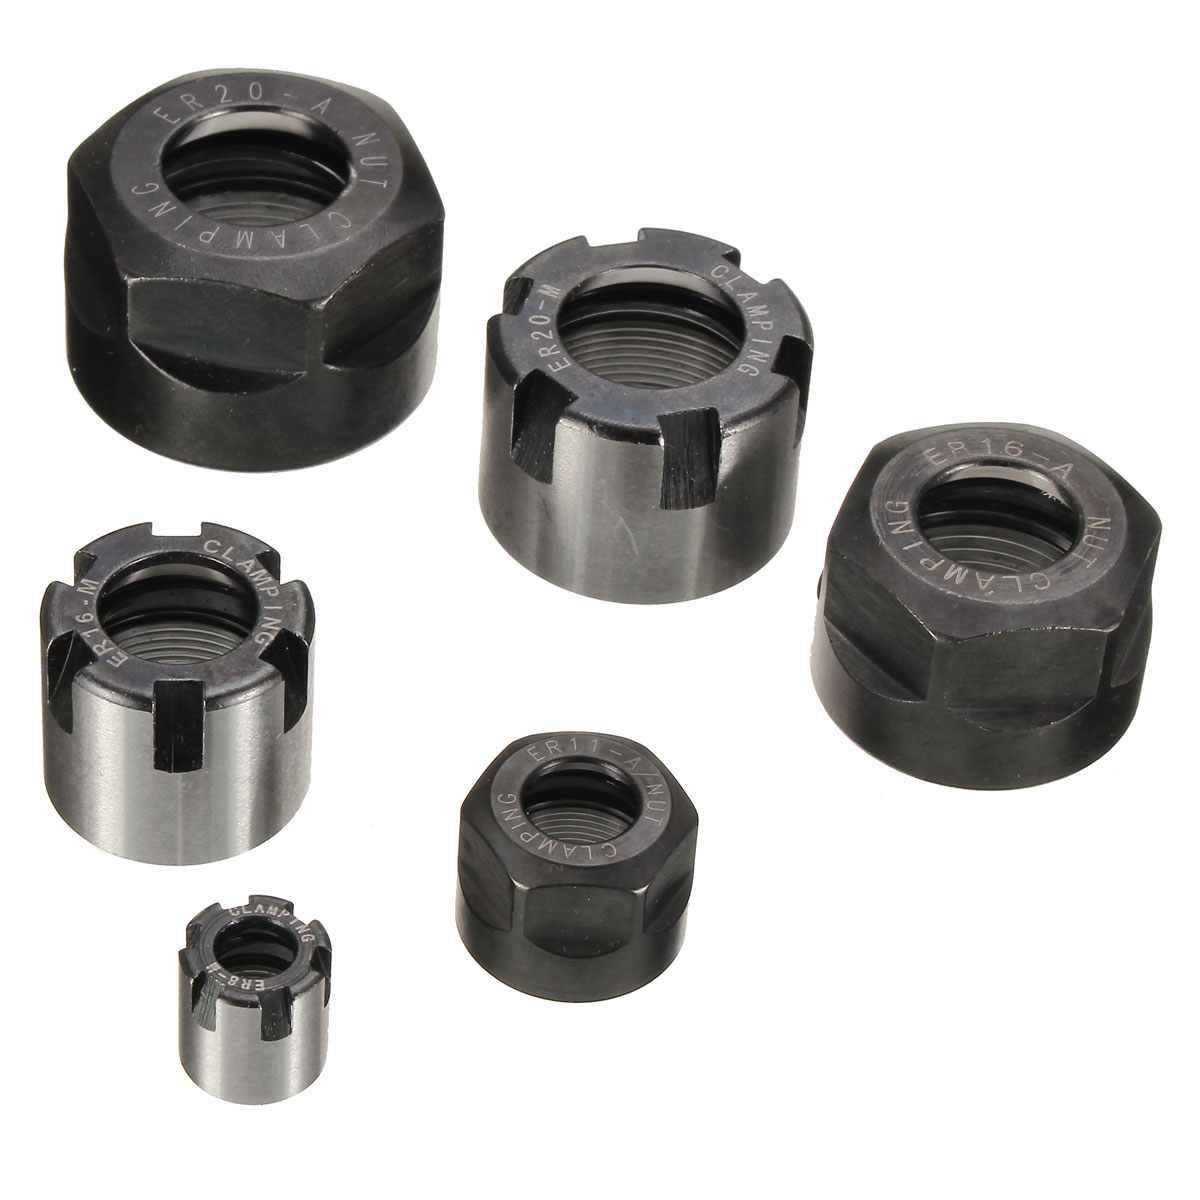 ER--A-M-Type-Nut-Collet-Clamping-Nut-for-CNC-Milling-Chuck-Holder-Lathe-Tool-1064956-1